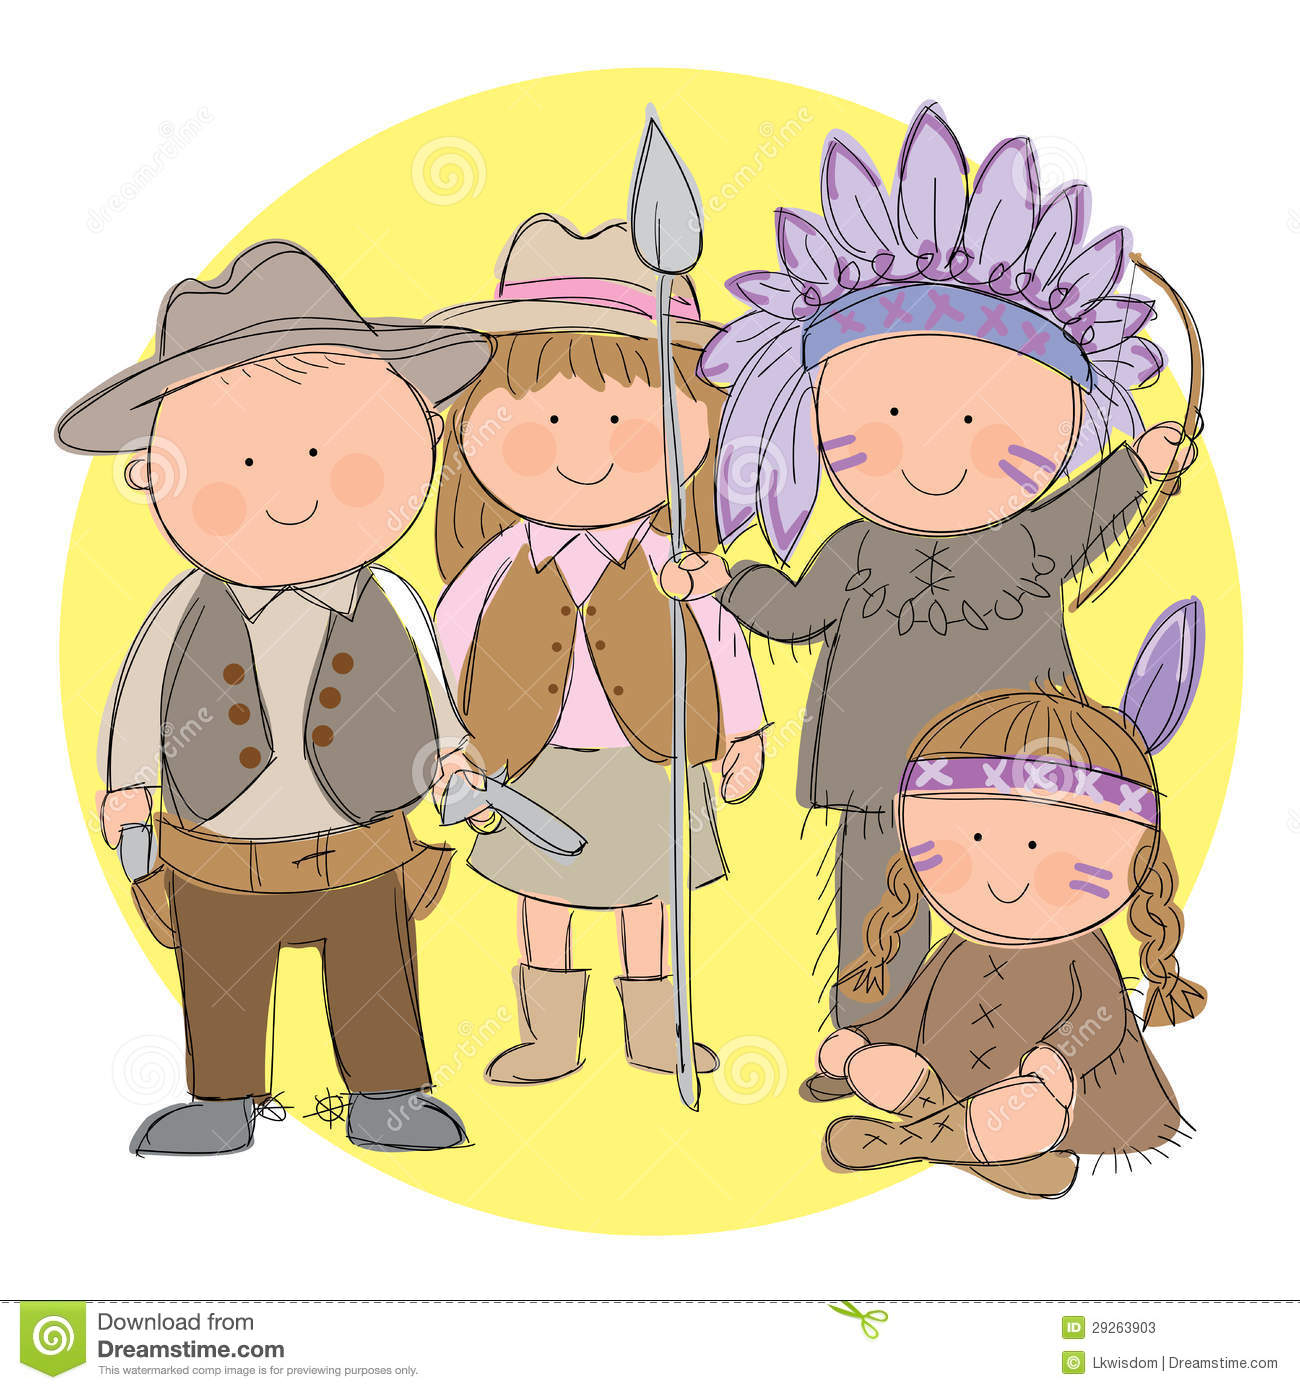 Hand Drawn Picture Of Children Dressed Up As Cowboys And Indians    